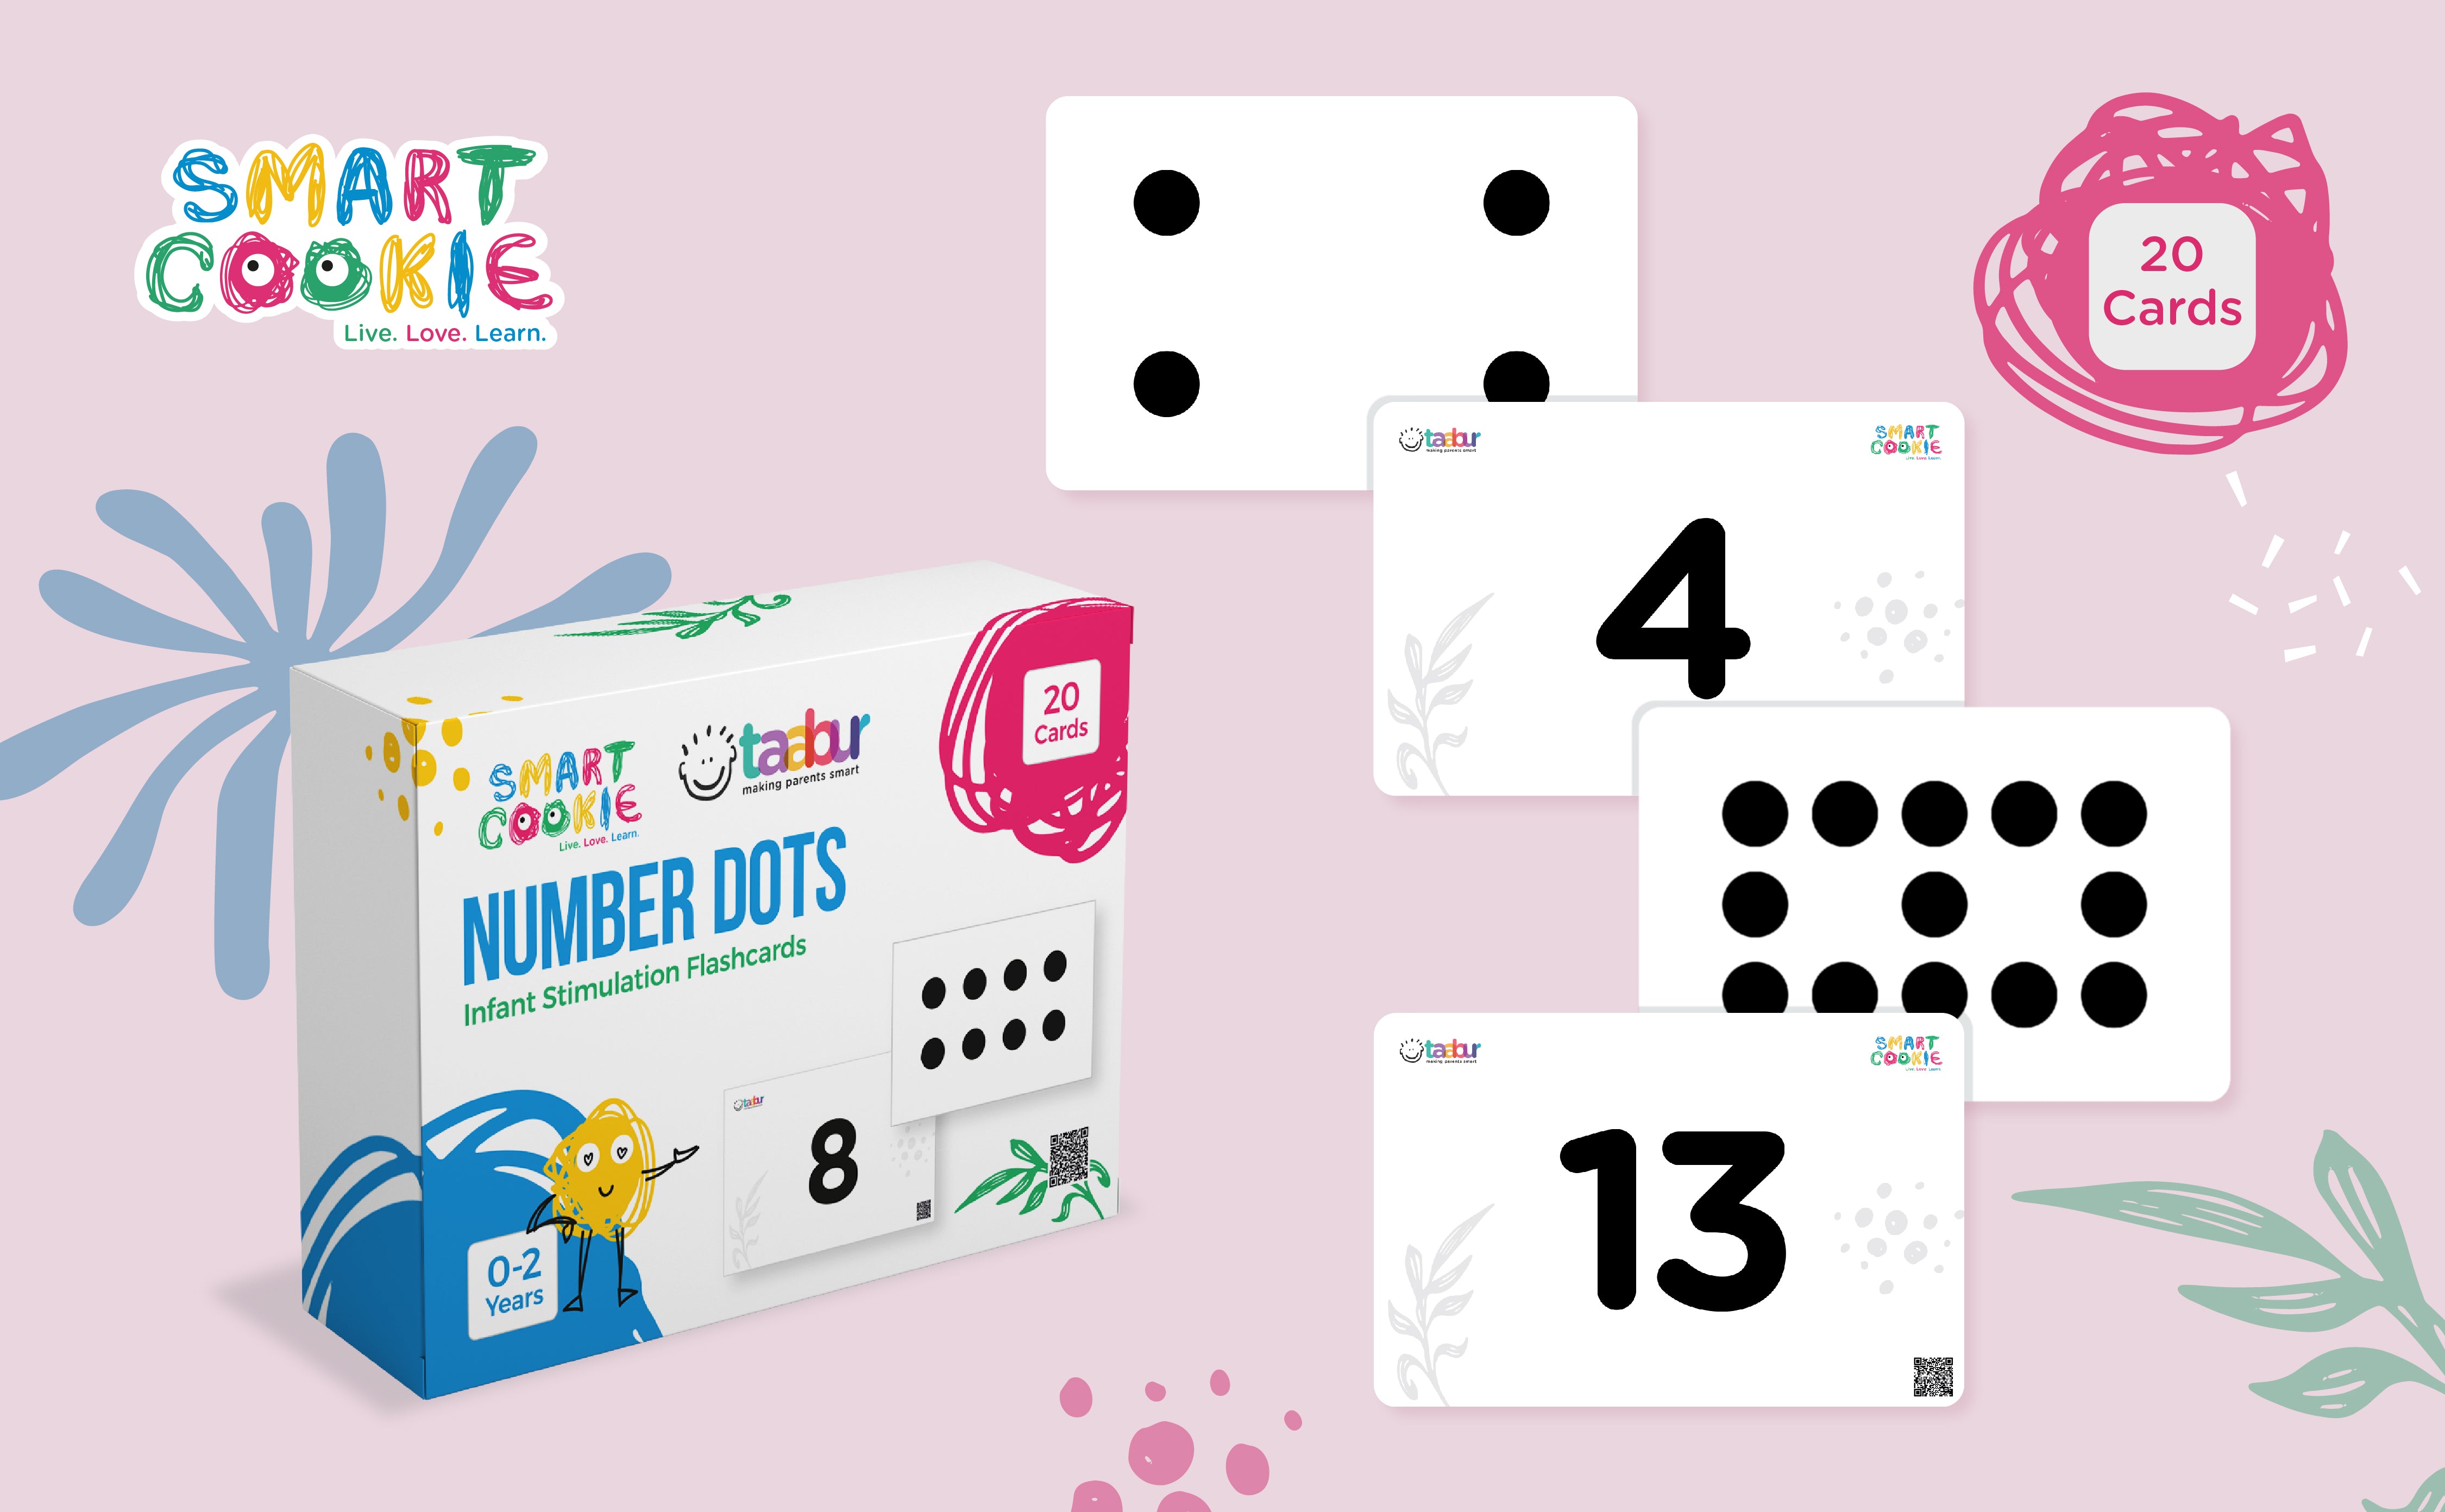 Number Dots - Infant Stimulation Flashcards (Black & White) (20 Cards) - for Kids Aged 0 to 2 Years Old